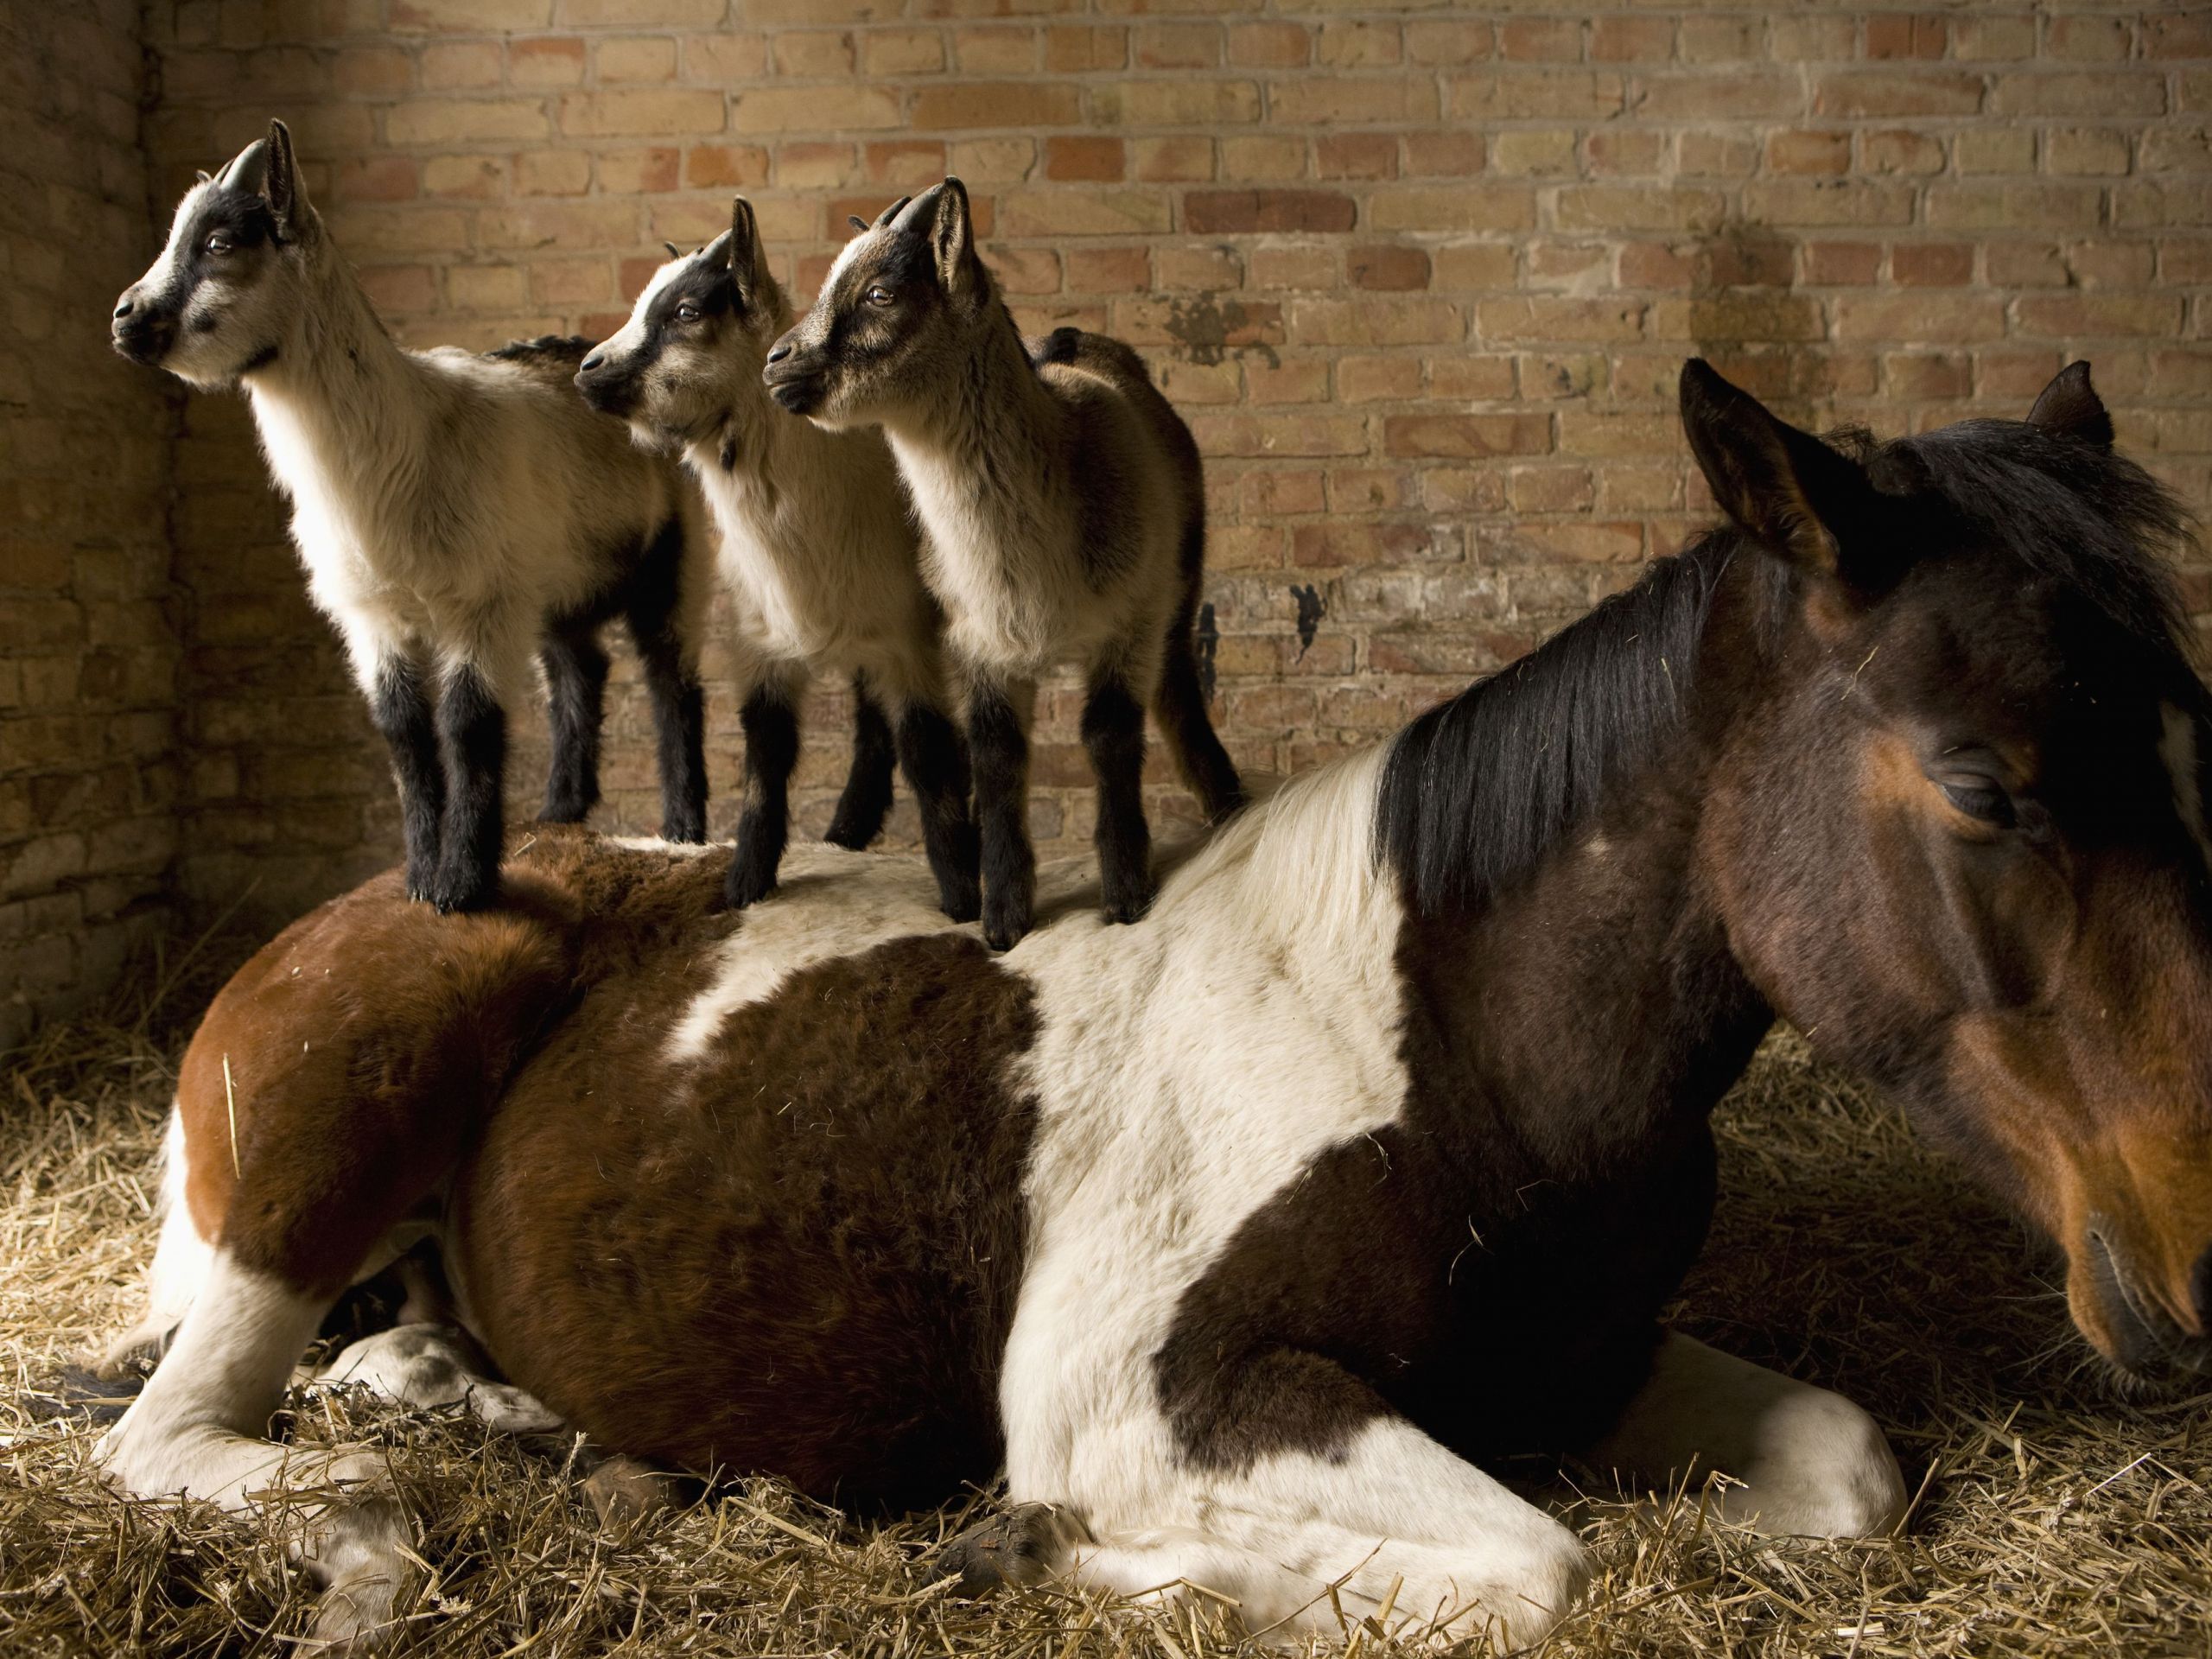 young goats standing on horse in stable 578e1c4d3df78c09e9e84ddd